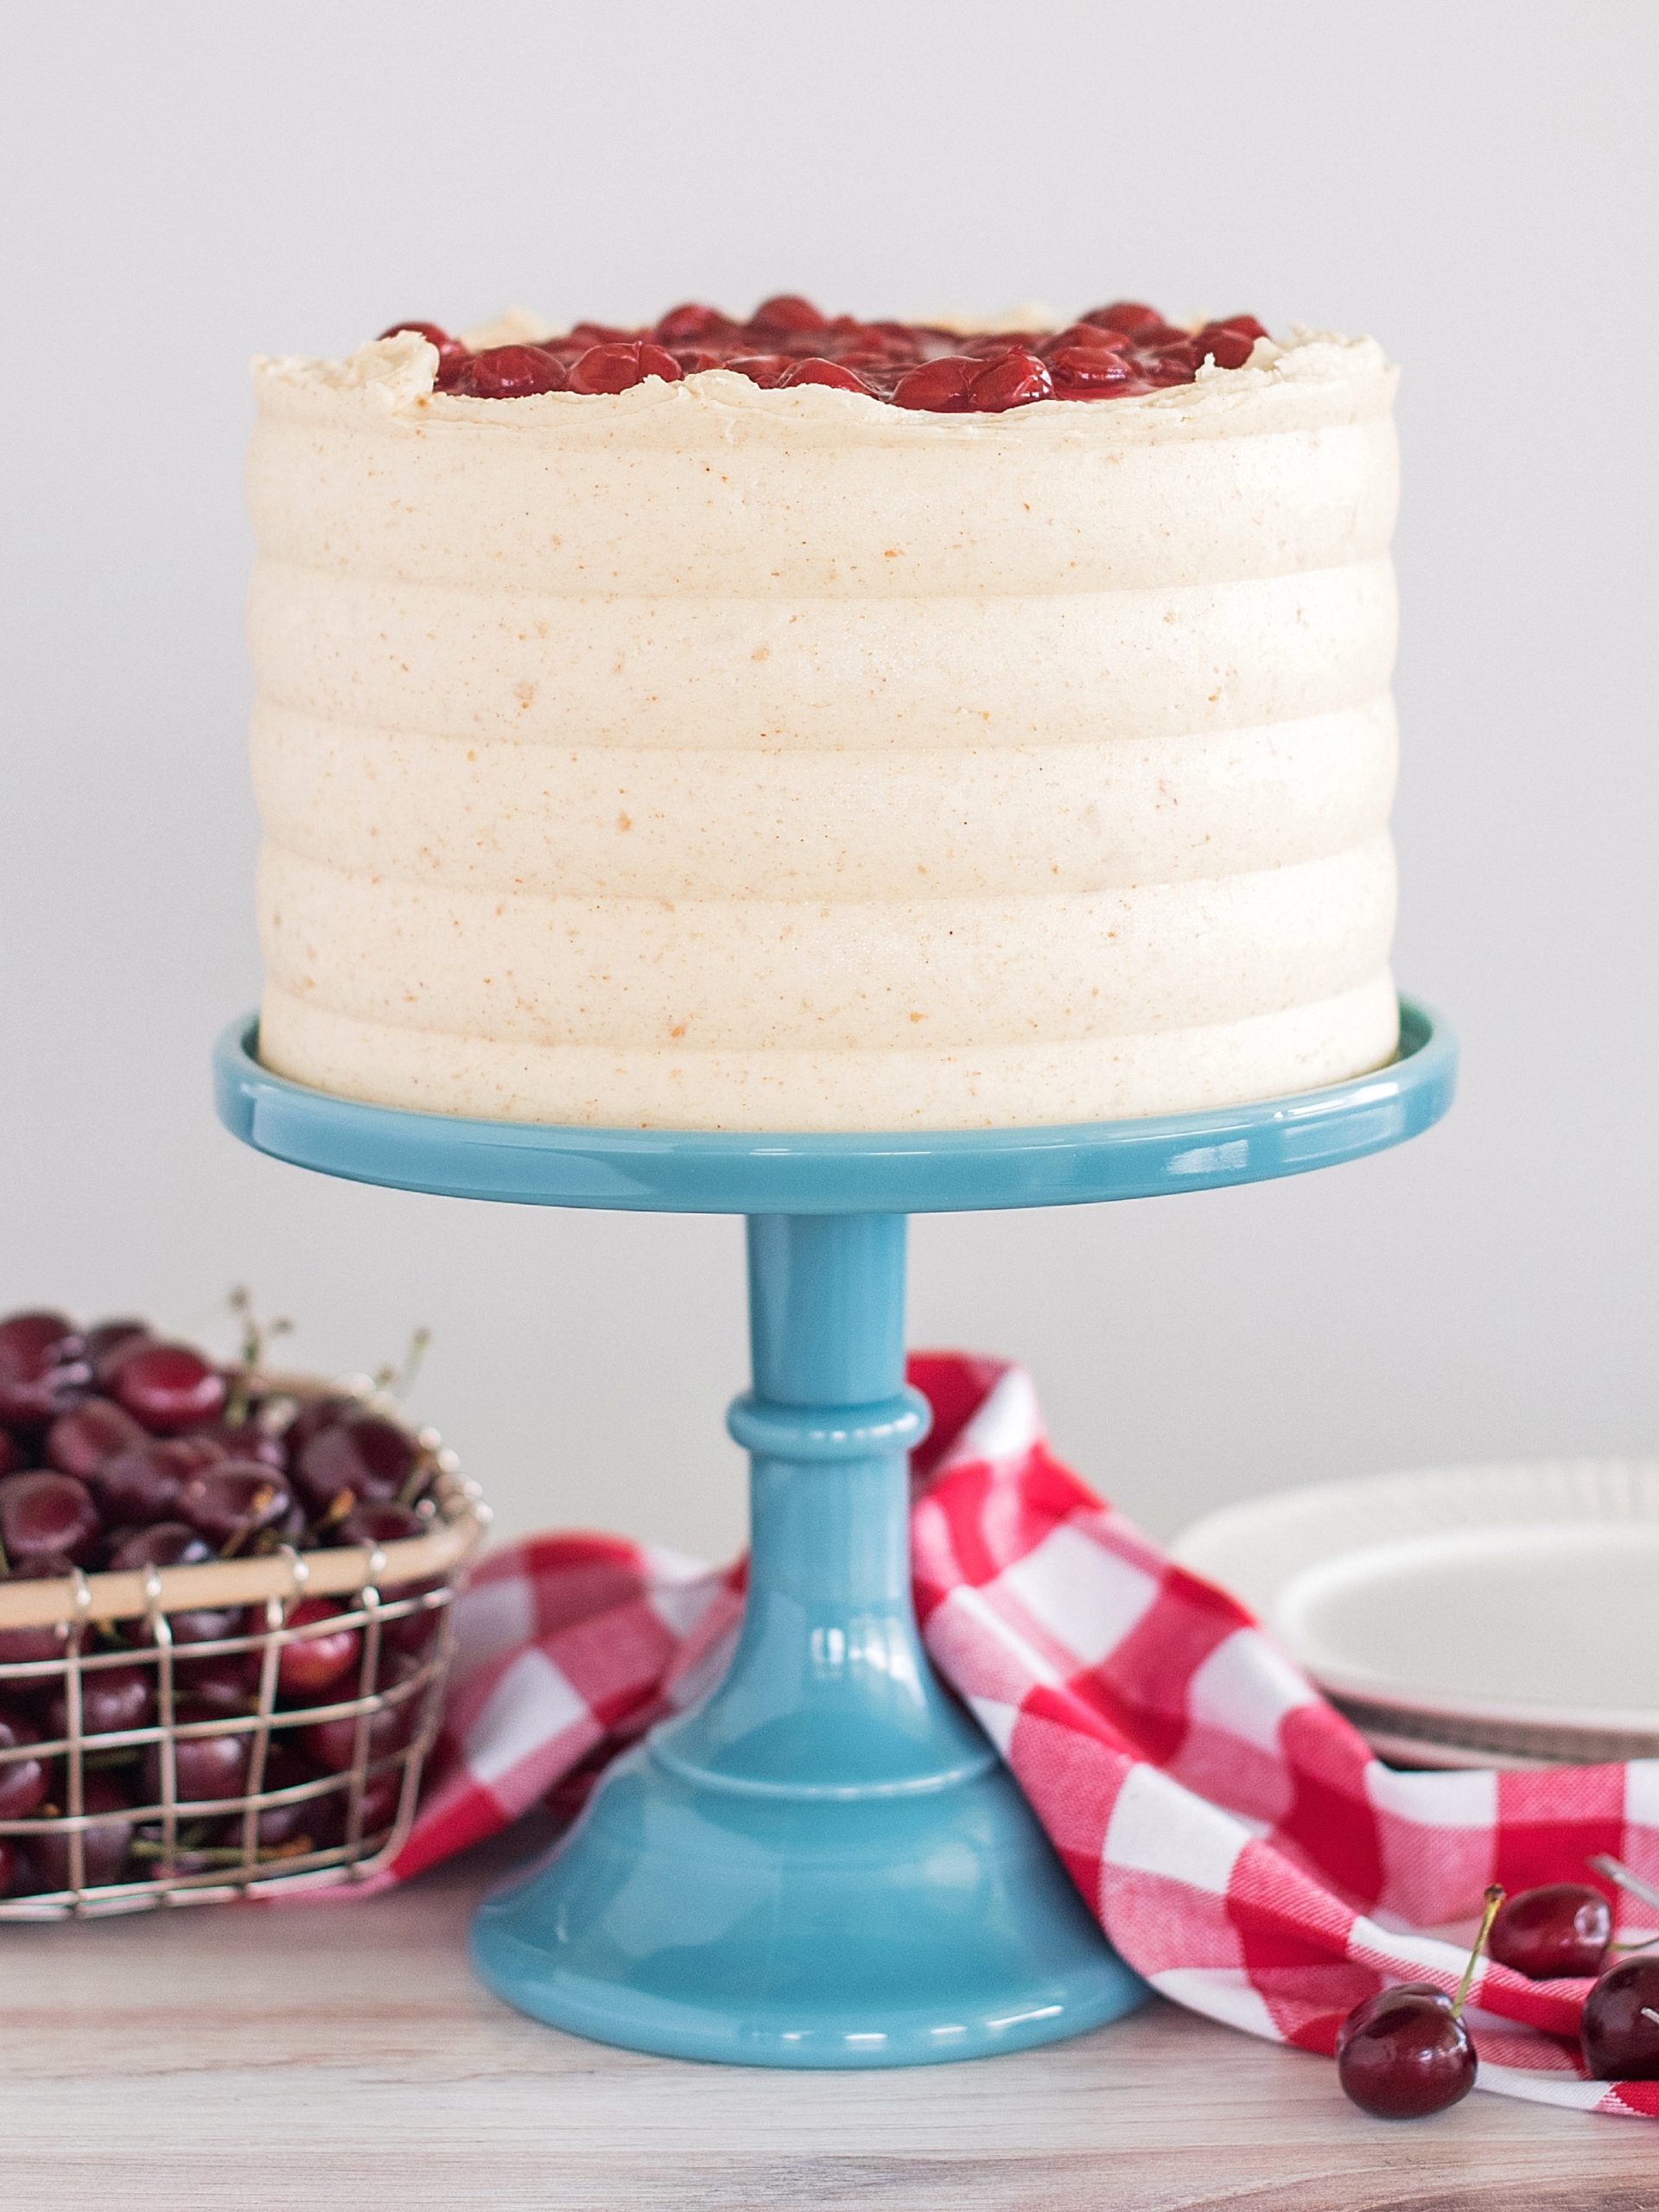 Cherry Cheese Pie Cake - dig into this delicious pie-inspired cake with layers of graham cracker, cream cheese cake, cheesecake filling, cherry pie filling and graham cracker buttercream.  #cakebycourtney #cherrycheesepiecake #cherrypie #cherrycheesepie #bestsummercakerecipes #summercakerecipe #bestcakerecipes #summercakes #cherrypiecake #cherrydessert #summerdessert #howtomakebuttercreamfrosting #howtomakecake 